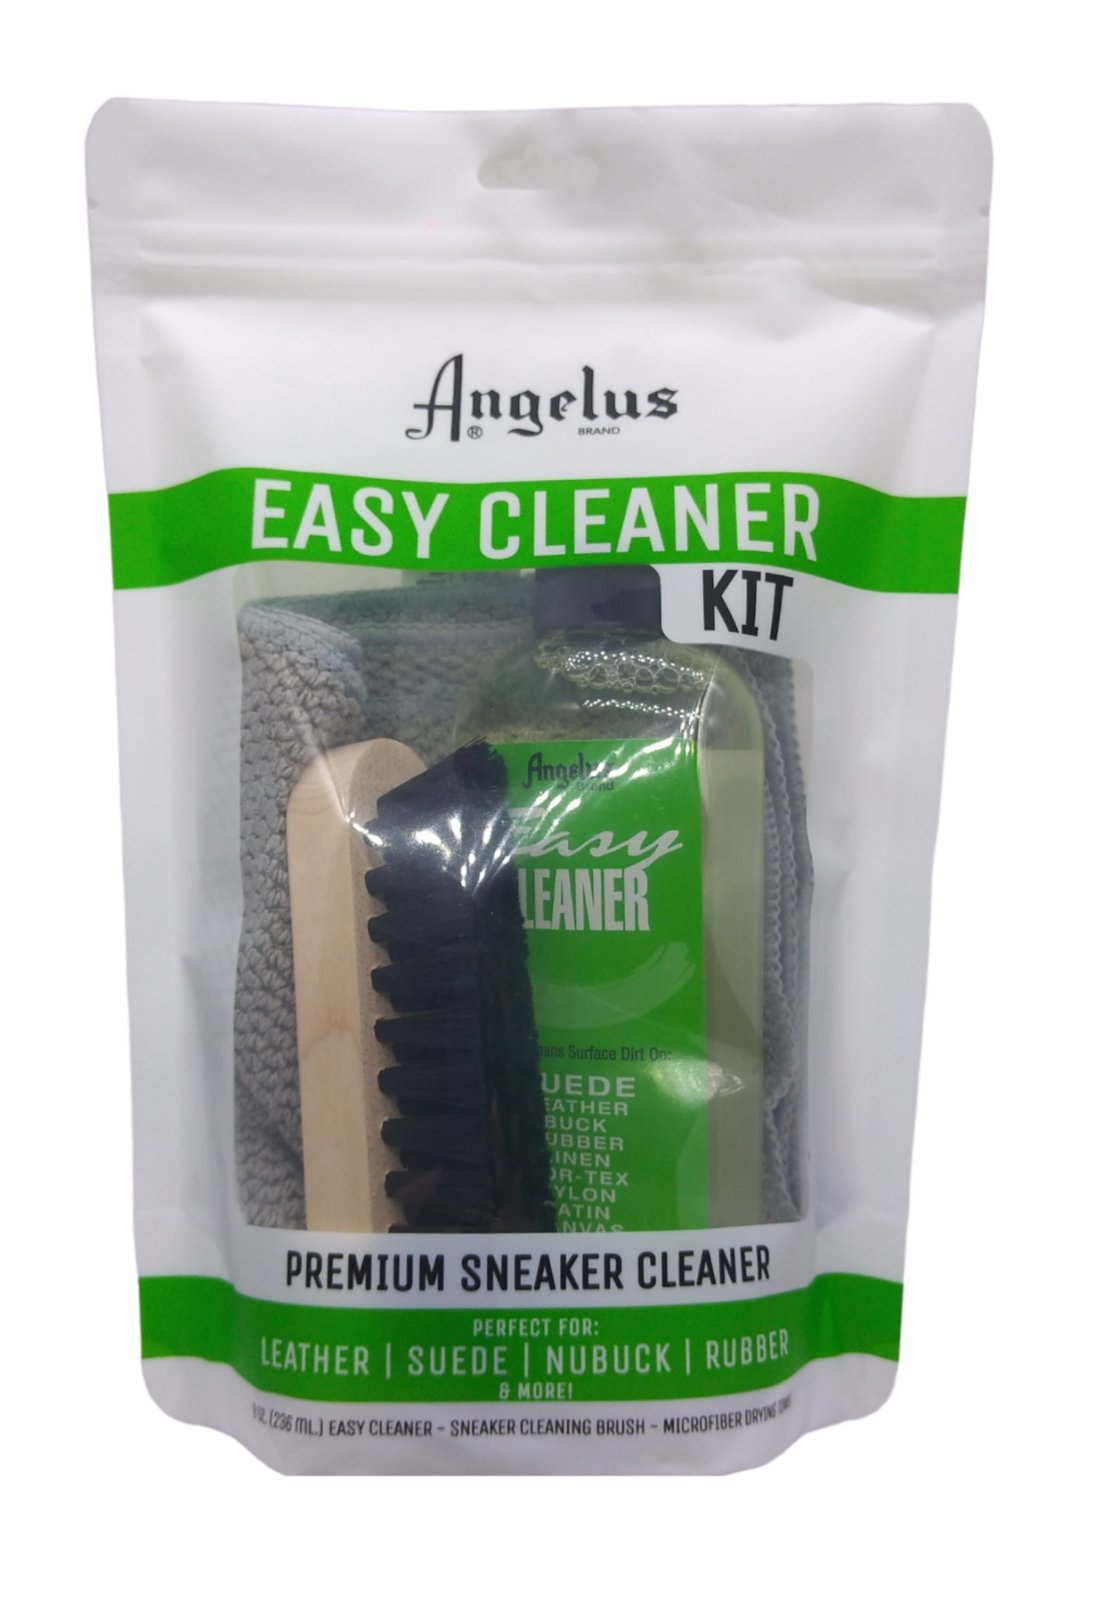 ANGELUS SHOE CLEANER KIT EASY CLEANER KIT FOR SNEAKER The Leather Project  II